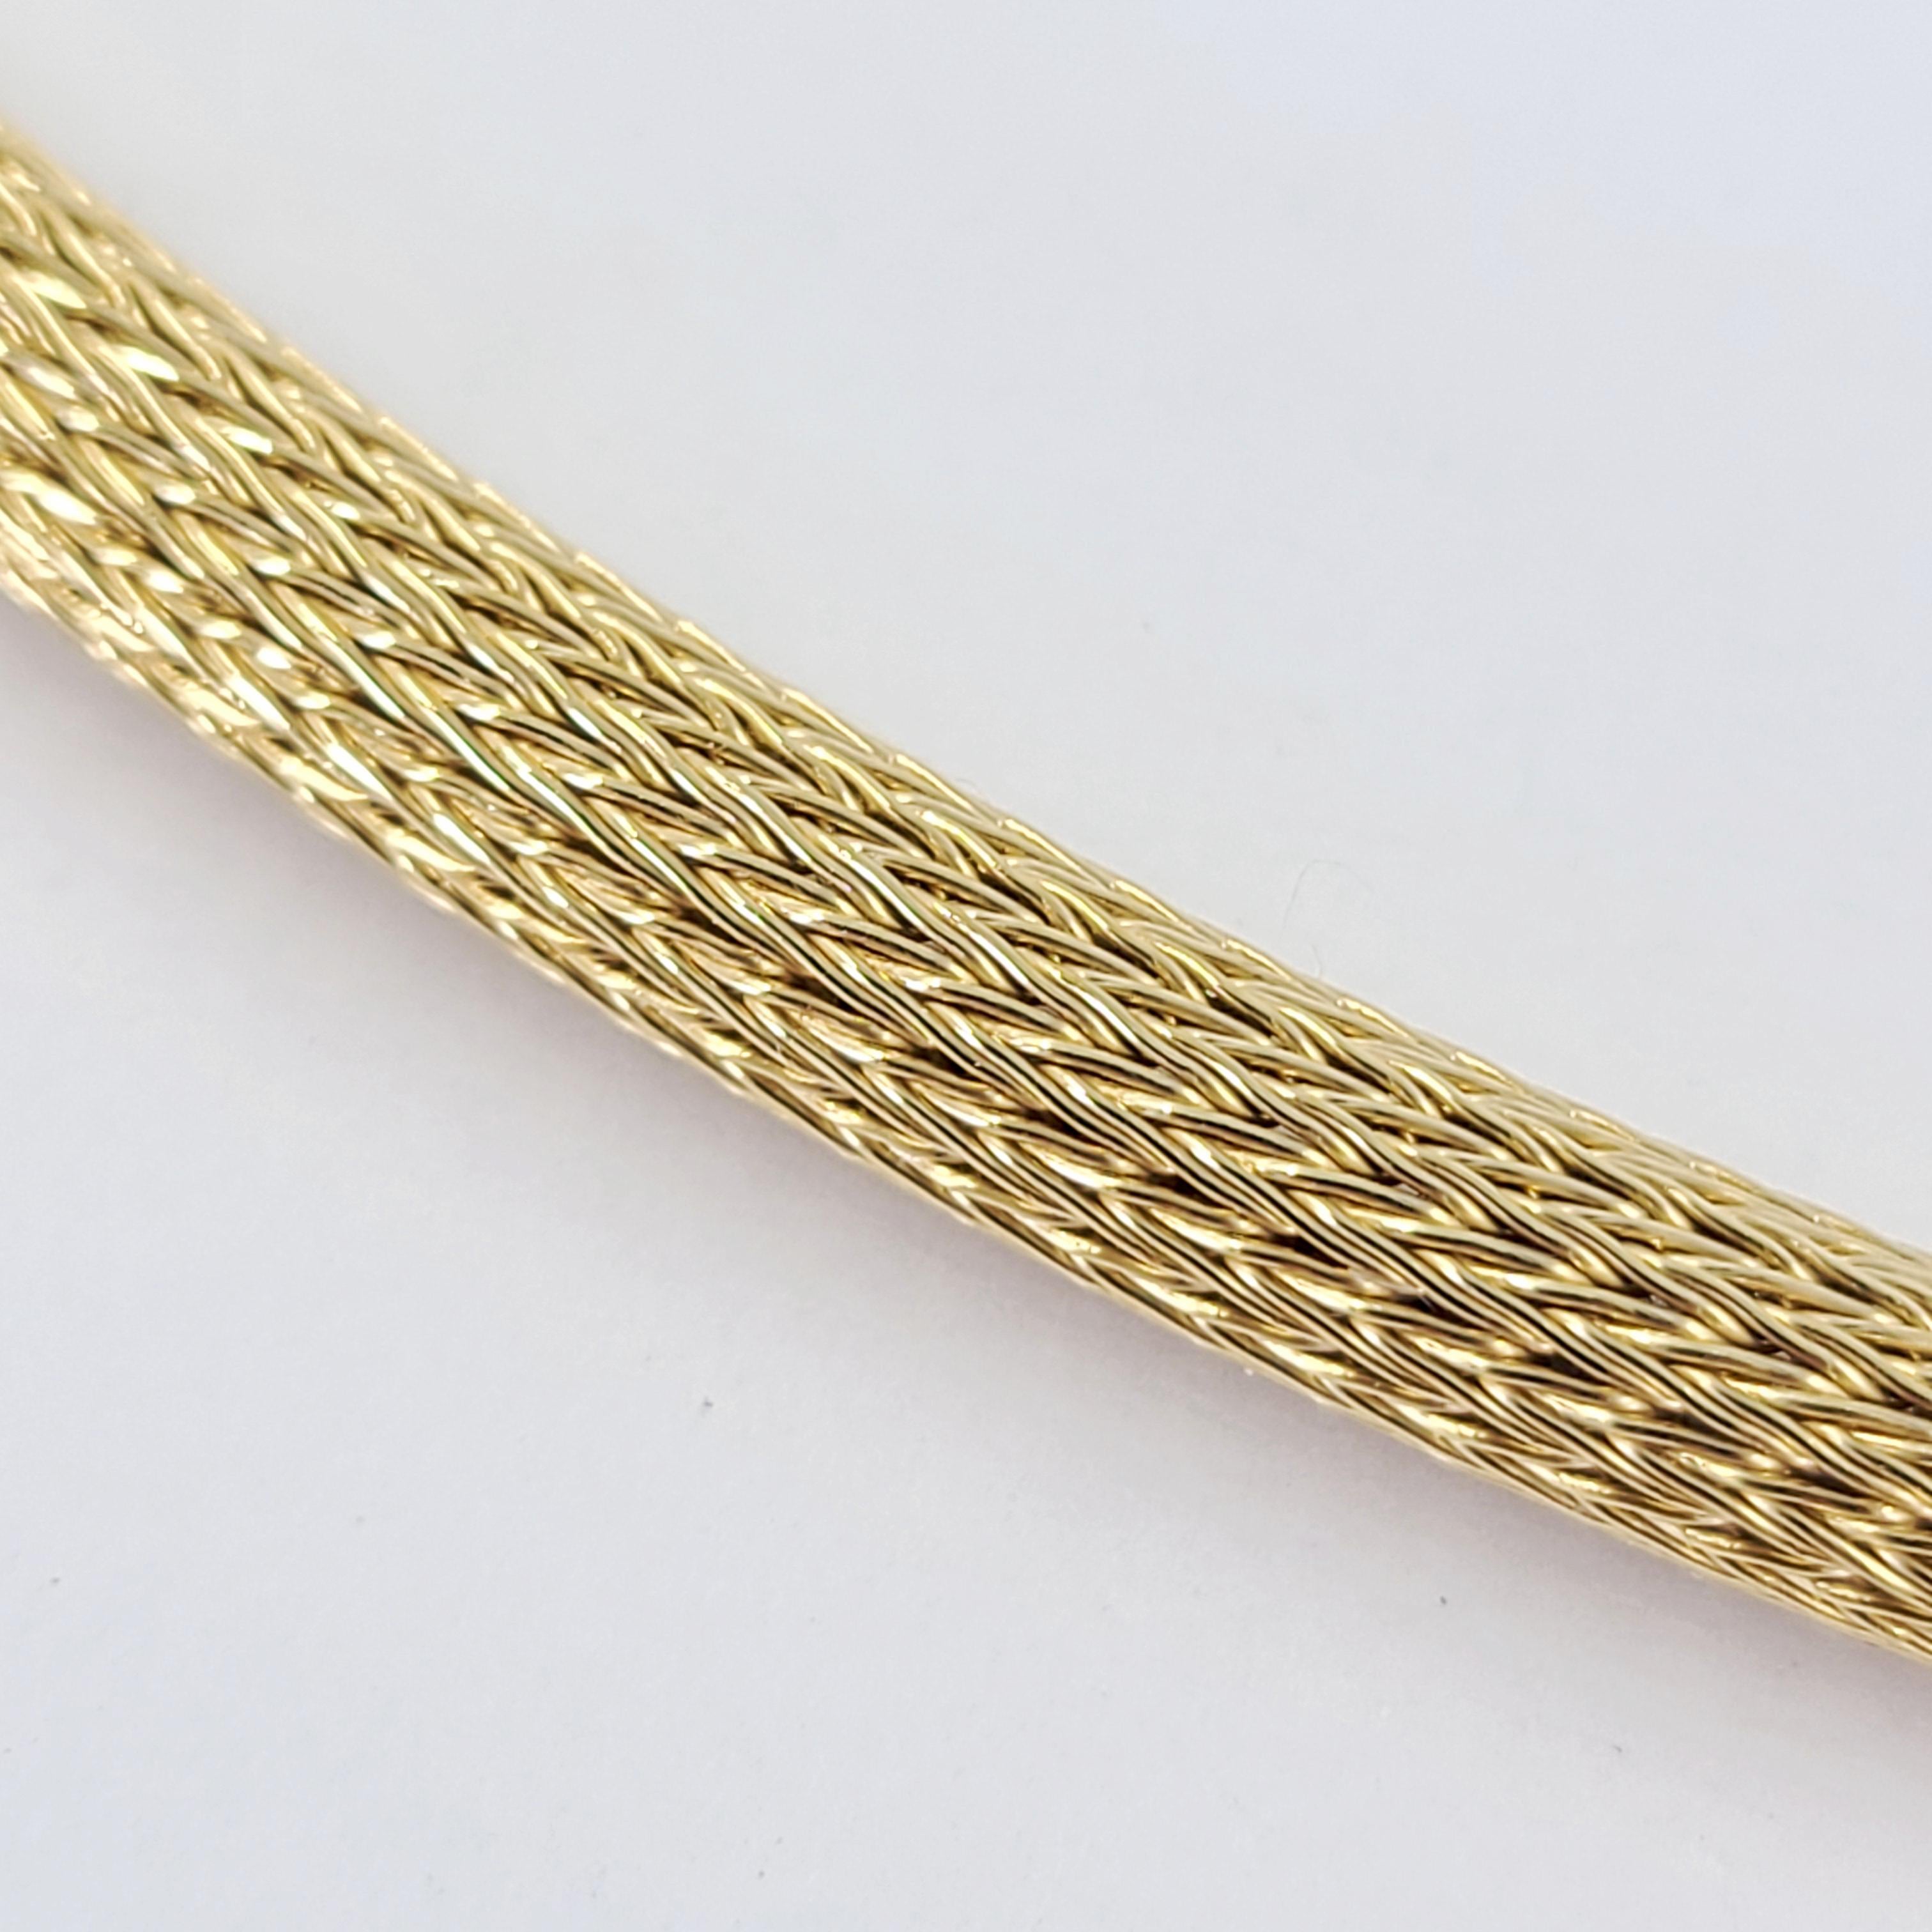 18 Karat Yellow Gold 4mm Woven Tube Necklace Measuring 17.5 Inches Long. Finished Weight Is 22.8 Grams. Twisting Lock Clasp.